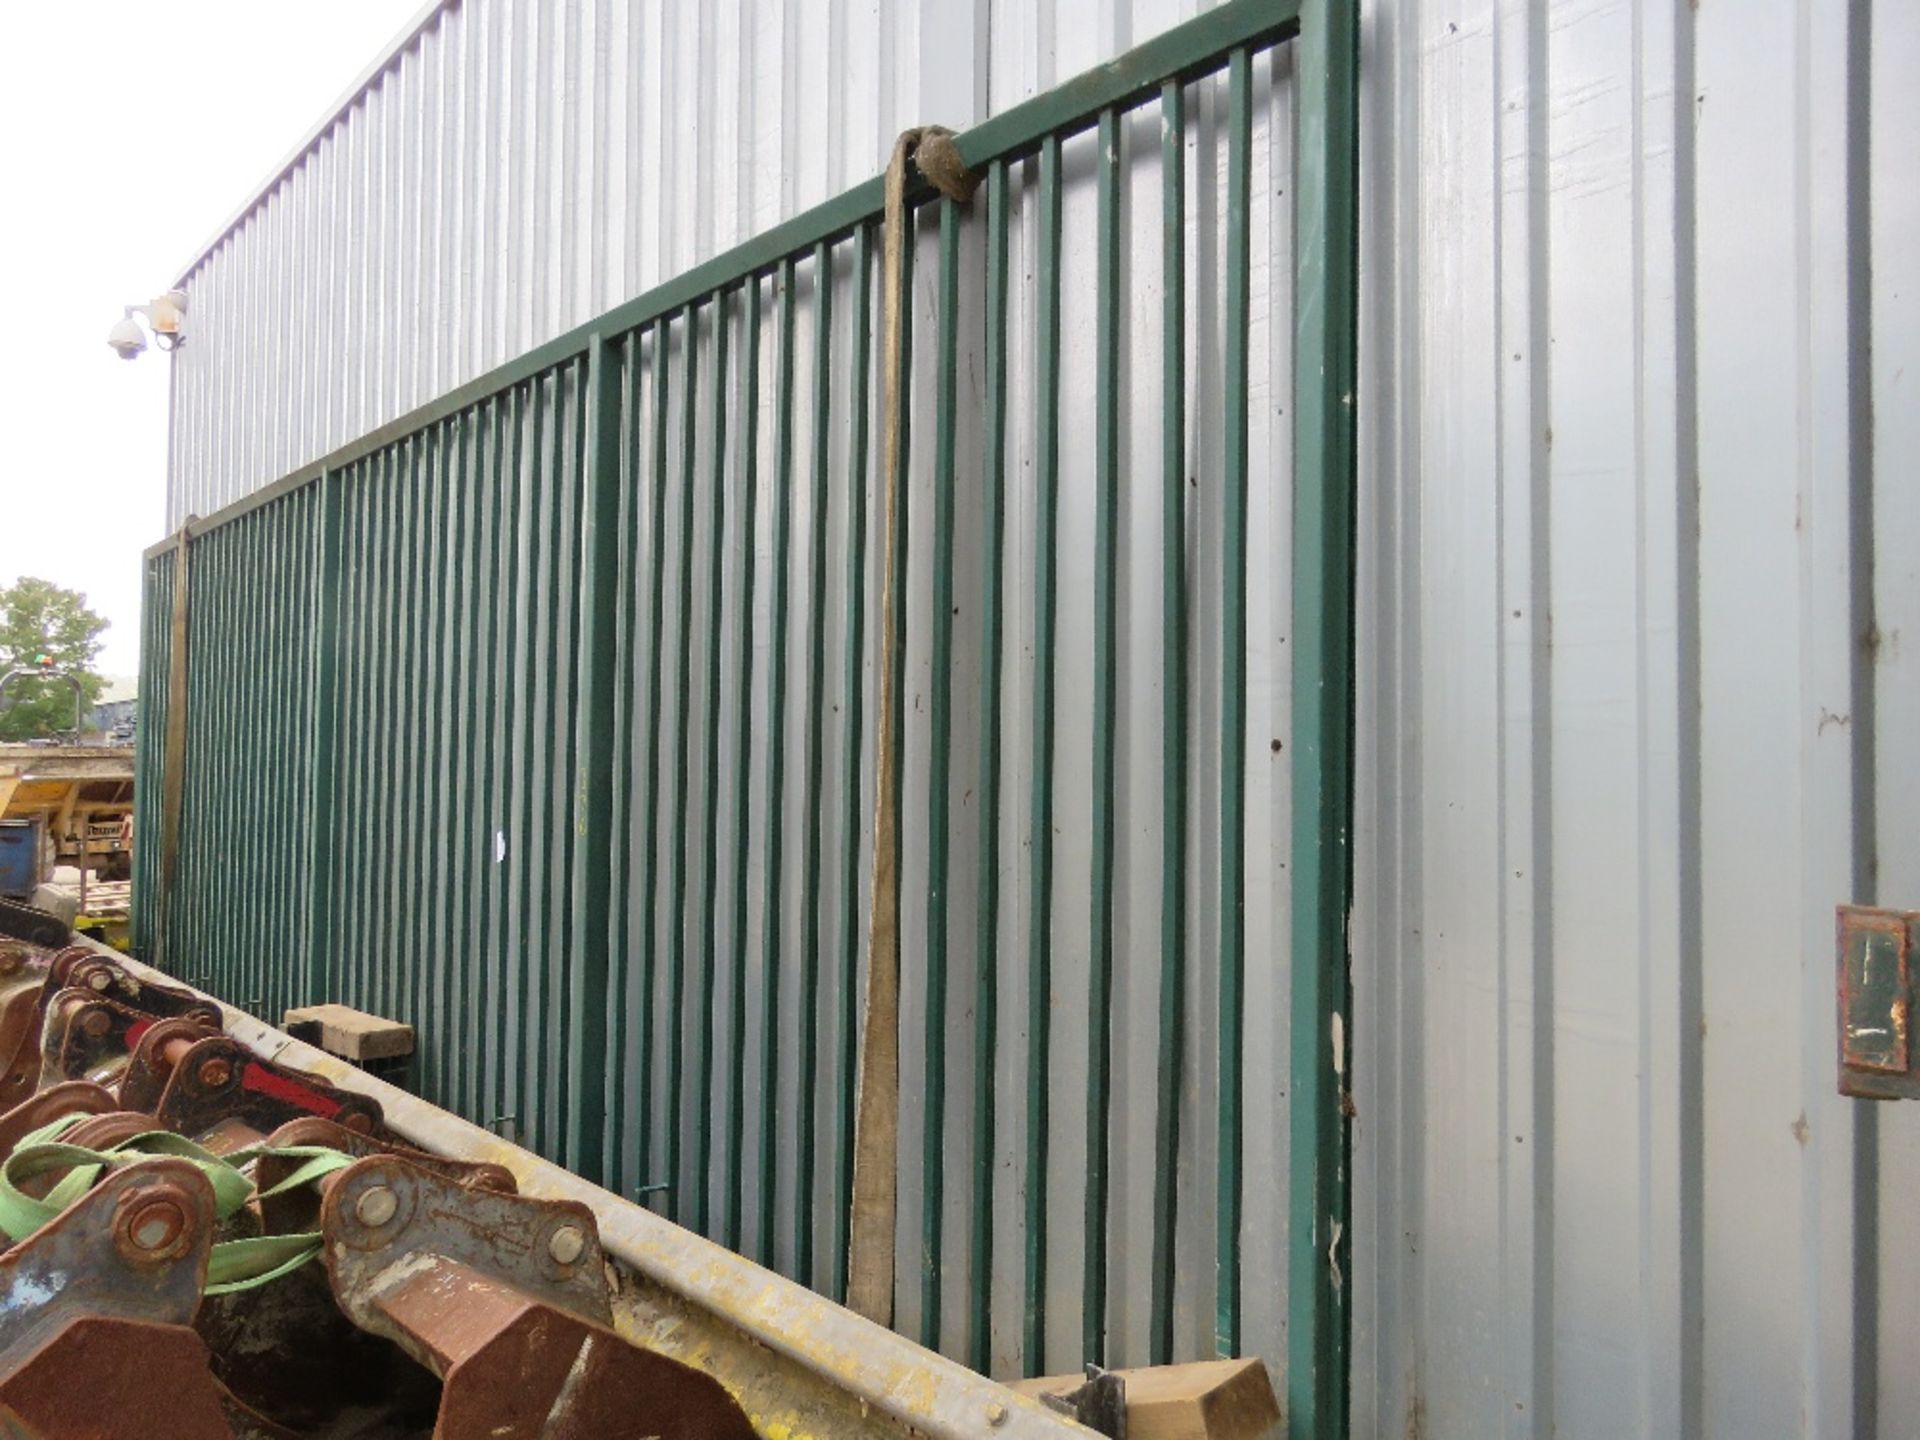 EXTRA LARGE SIZED HIGH SECURITY GREEN SLIDING YARD GATE, 3METRES HEIGHT X 8METRES LENGTH APPROX. LOT - Image 2 of 3